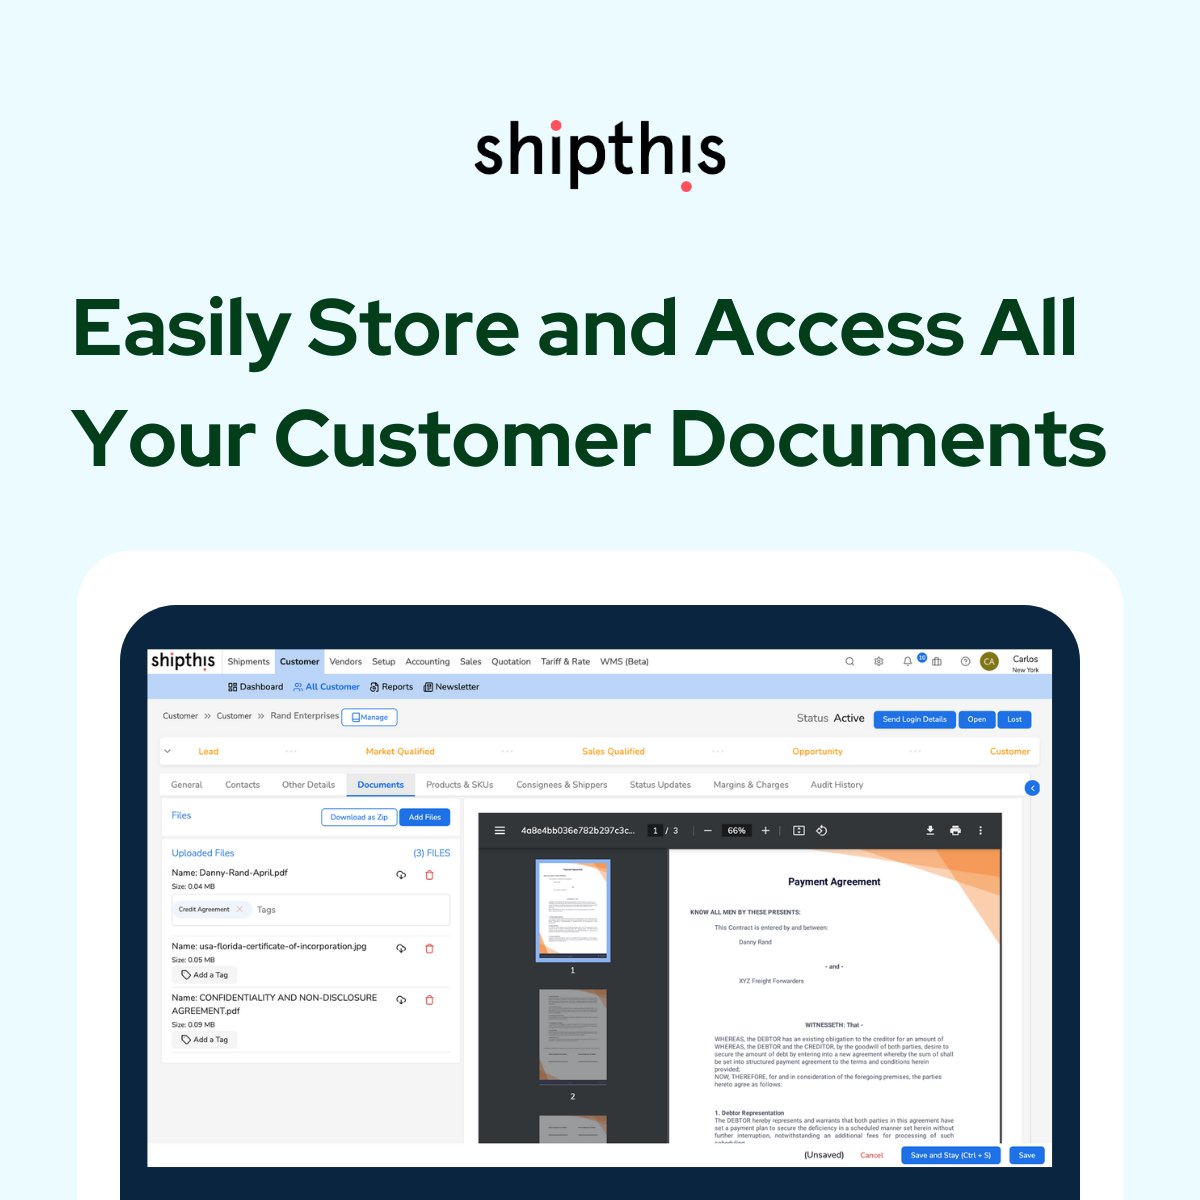 Shipthis Customer Relationship Management enables effortless management, tracking, and quick retrieval of customer-related documents from a central repository. It enables customers to upload and access documents anytime via a web portal. #Shipthis #DocumentManagement